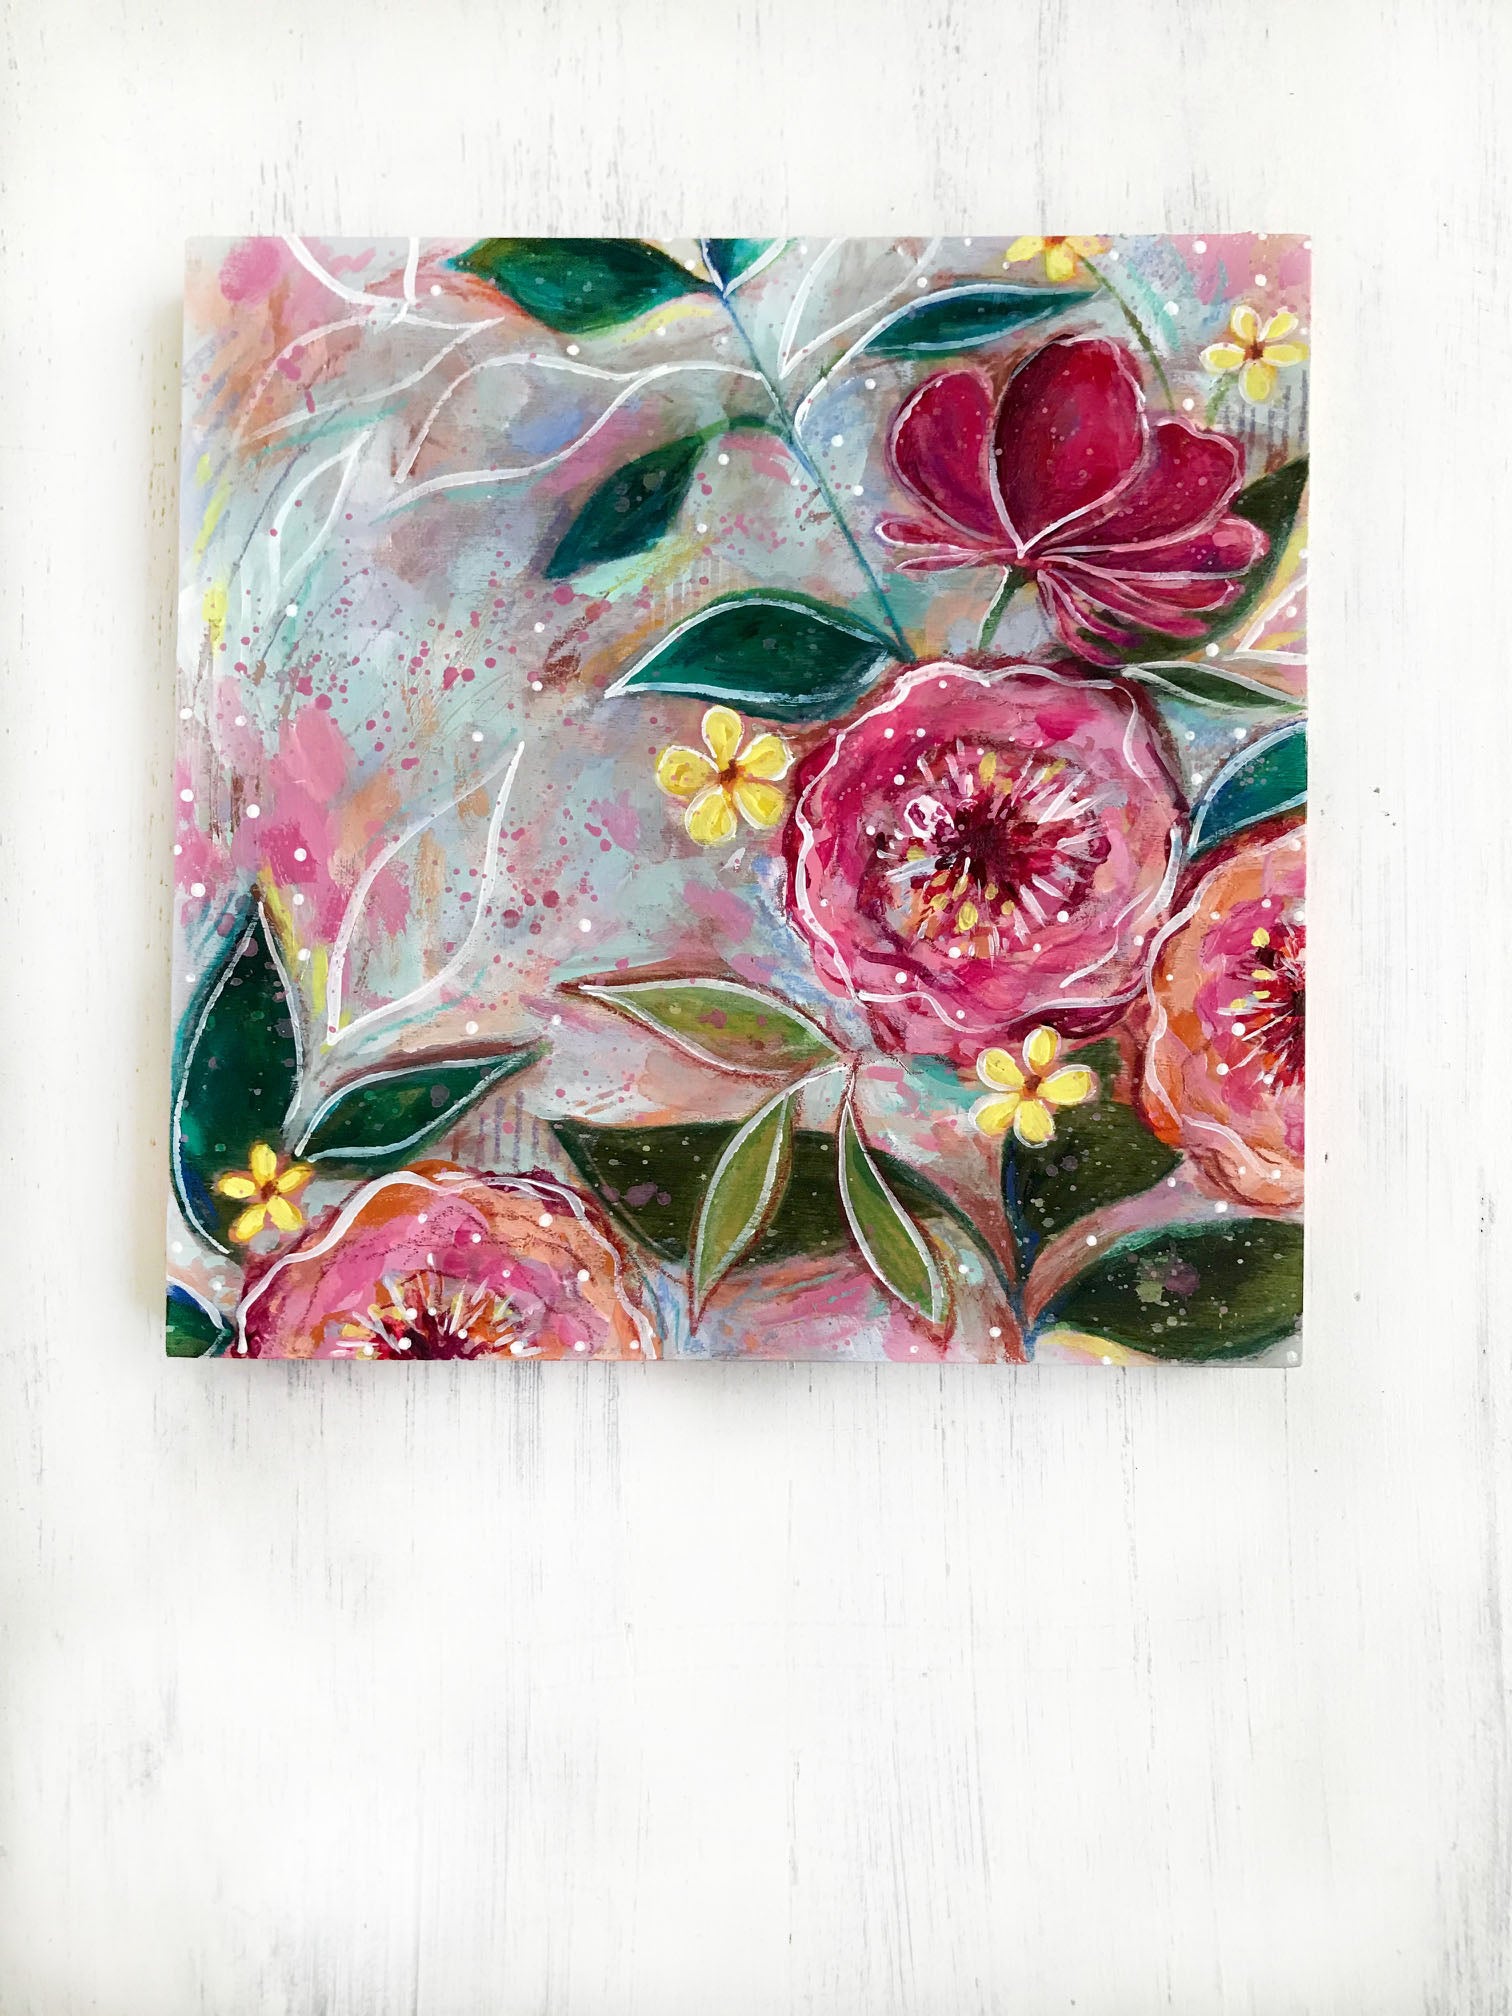 New Spring Floral Mixed Media Painting on 8x8 inch wood panel no.1 - Bethany Joy Art